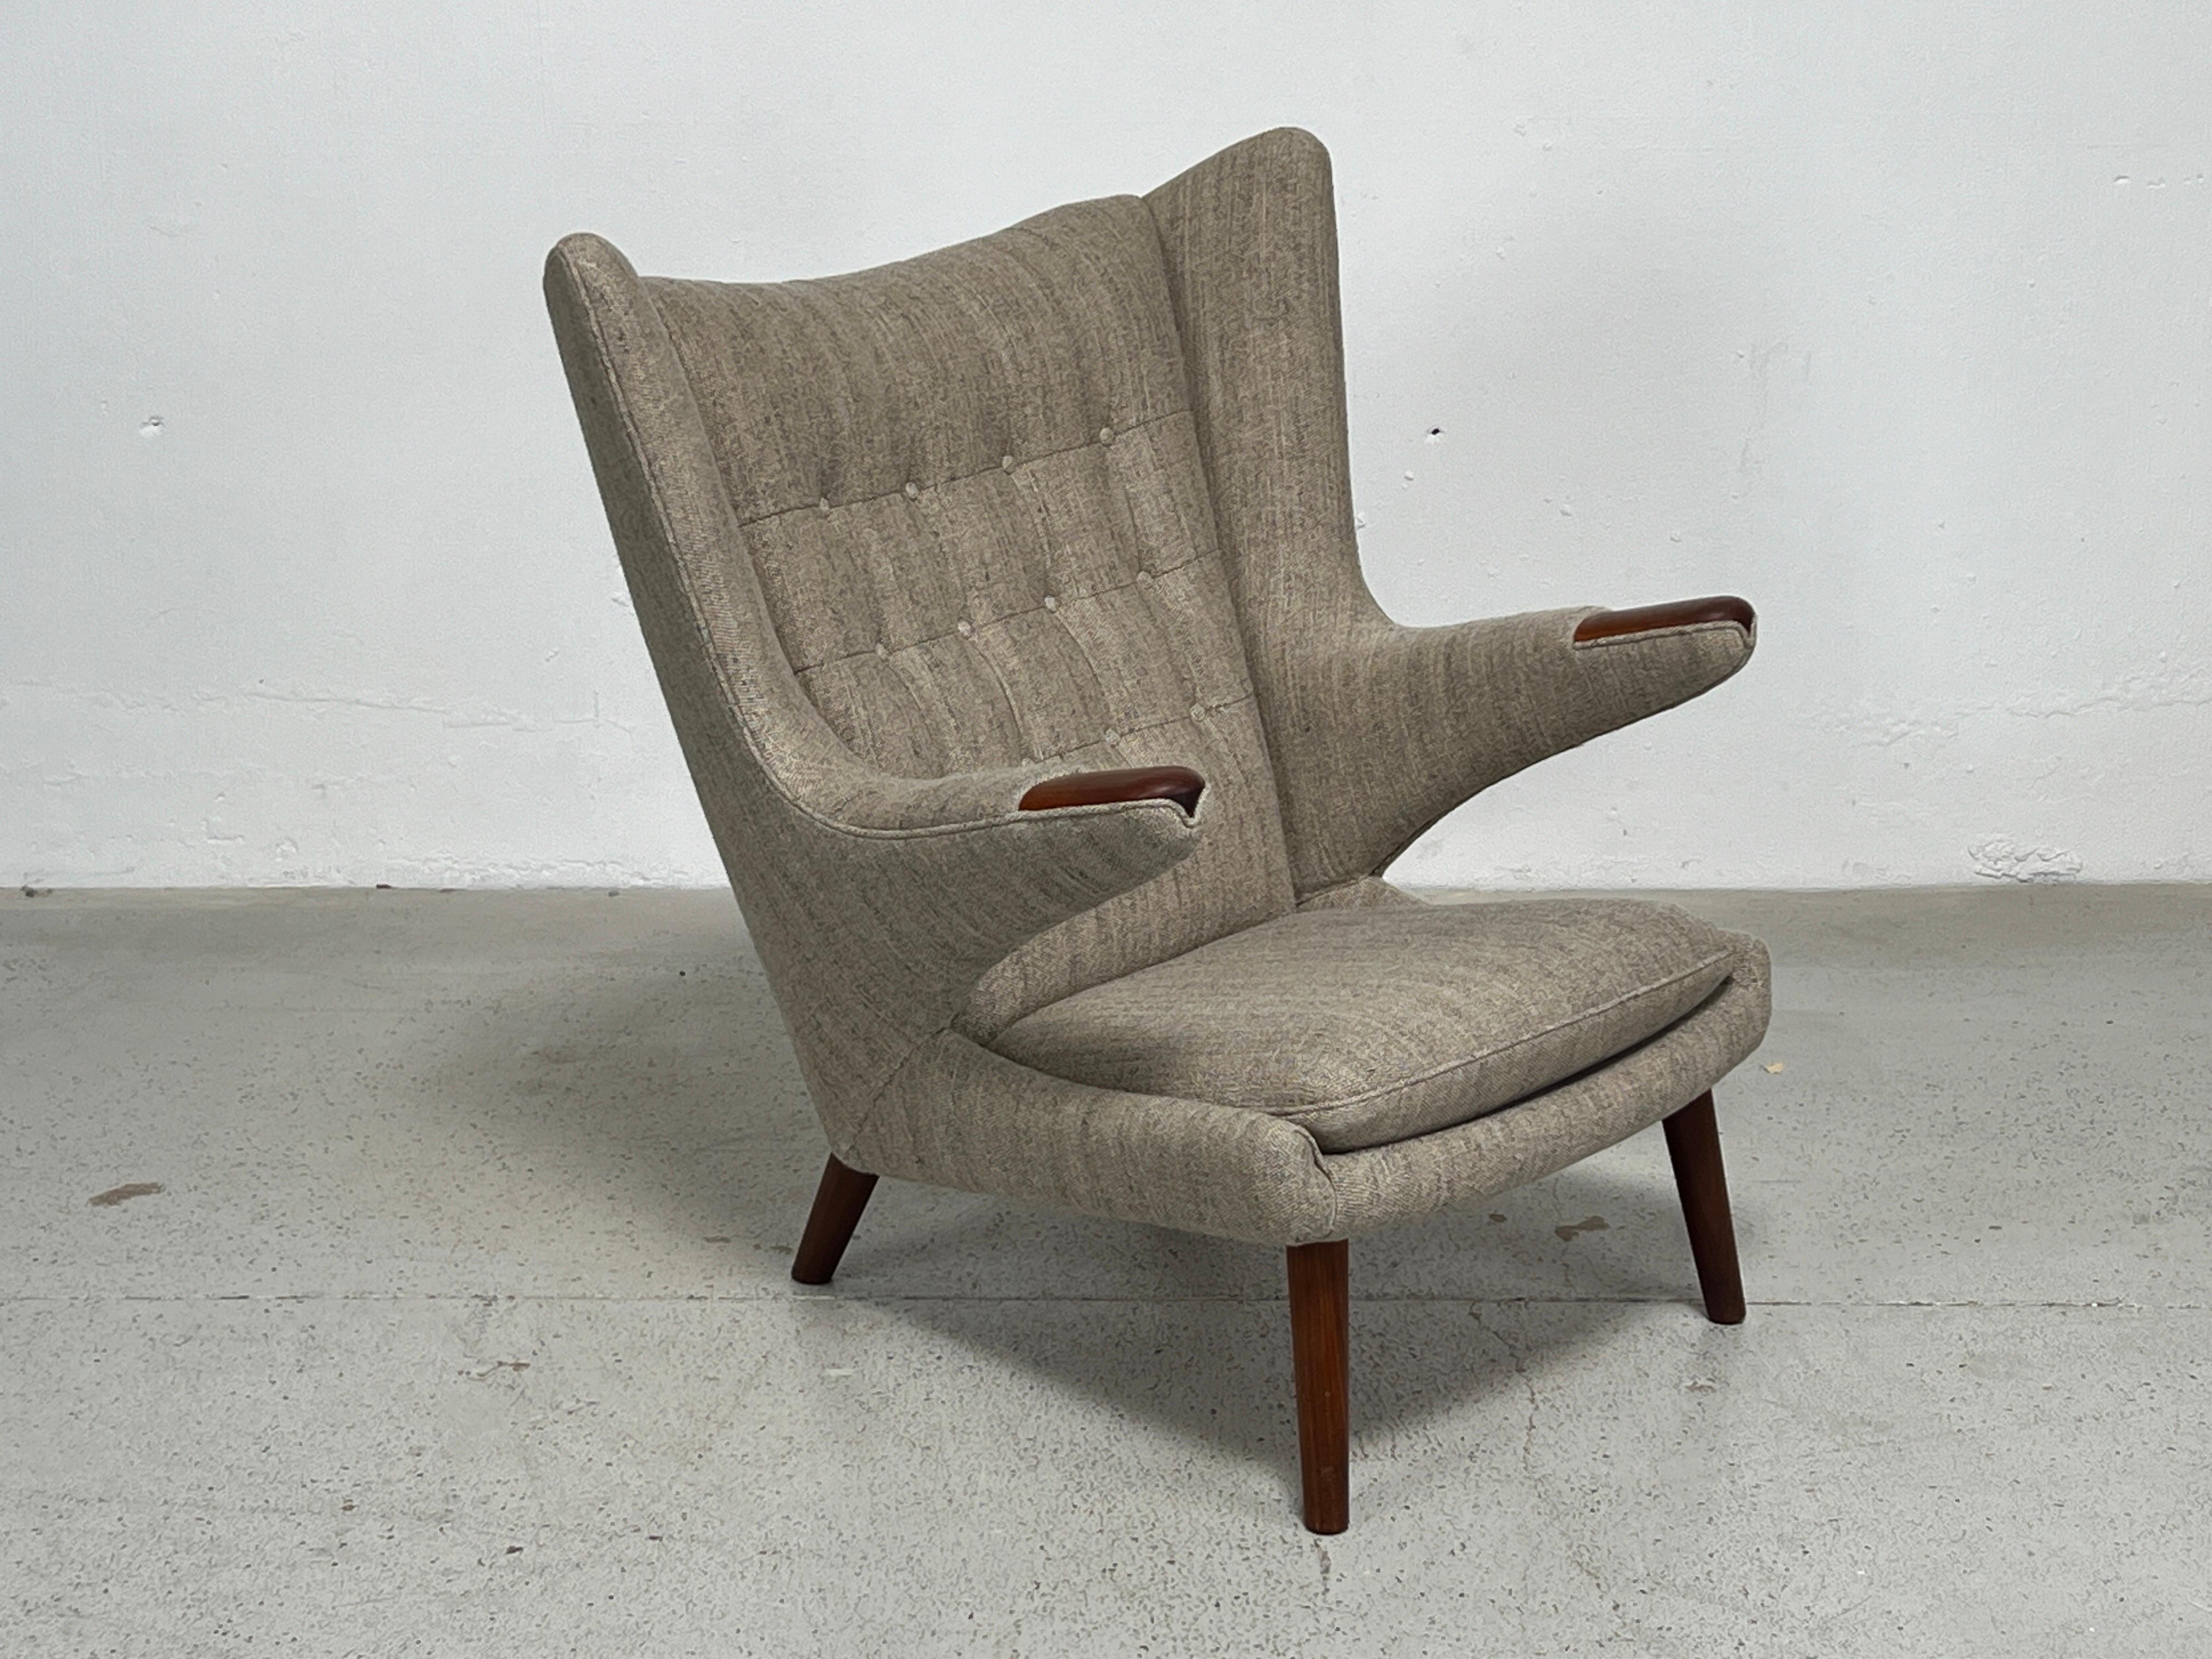 A beautifully restored Papa Bear chair designed by Hans Wegner for A.P. Stolen. Upholstered in Larsen / Sedona / Seaglass

